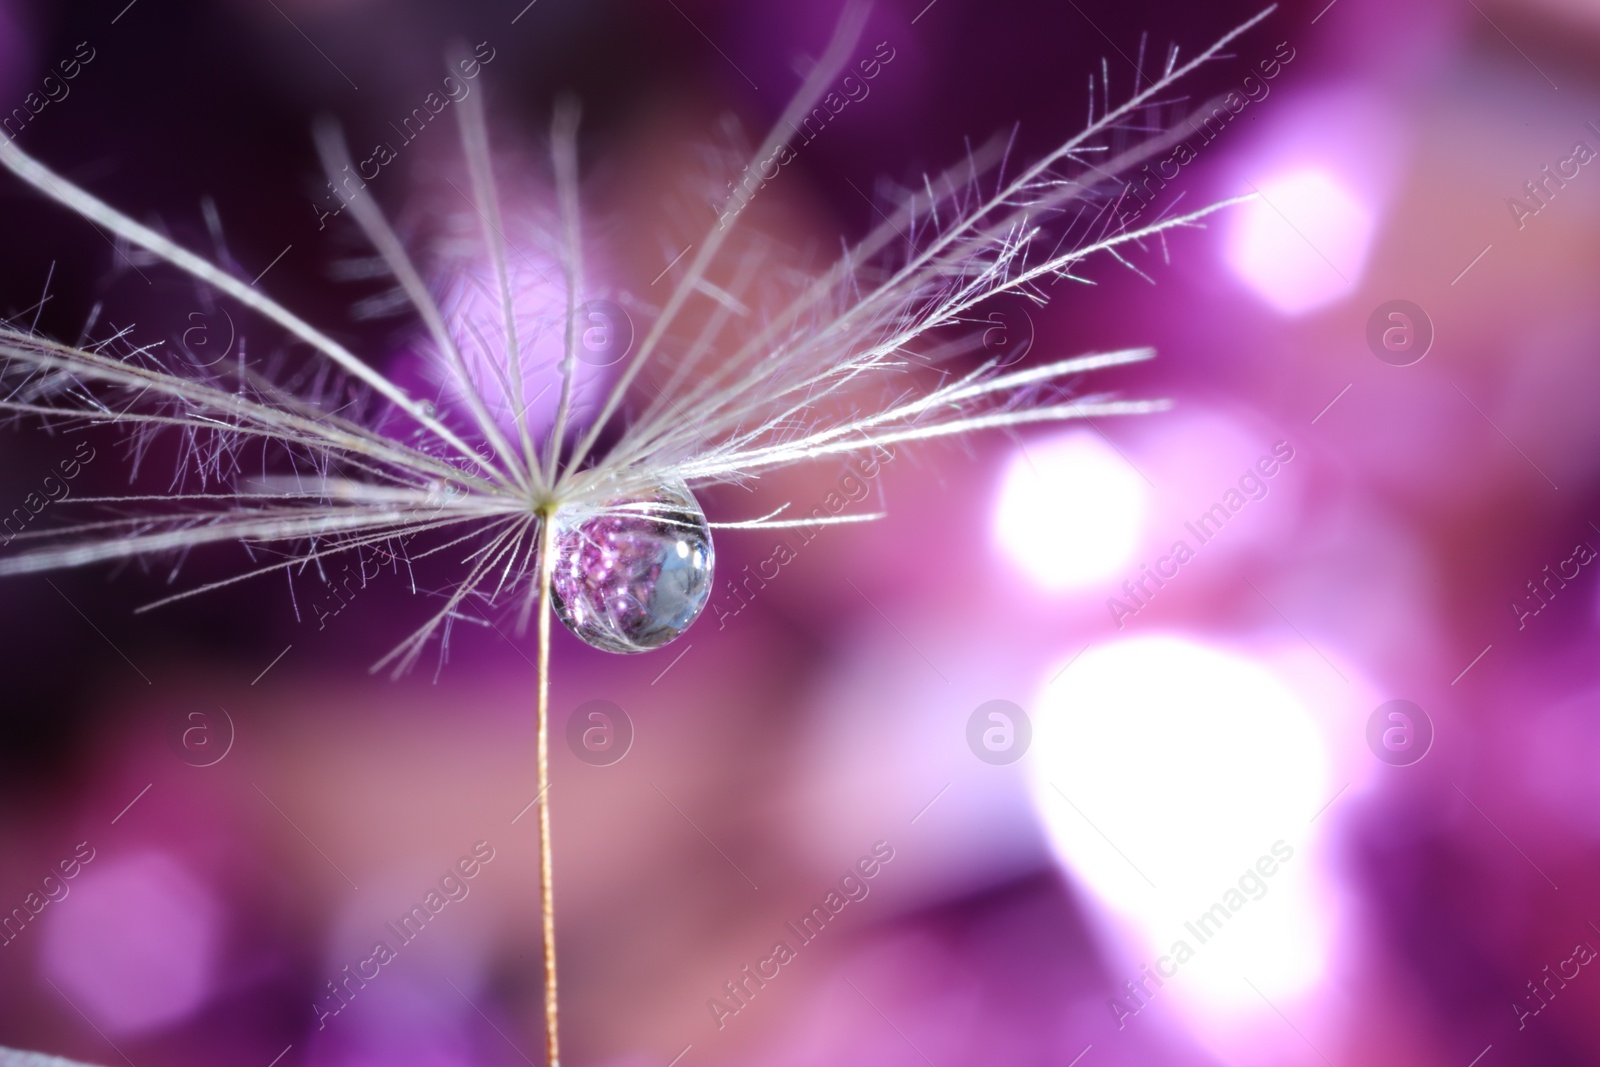 Photo of Seeds of dandelion flower with water drop on blurred background, macro photo